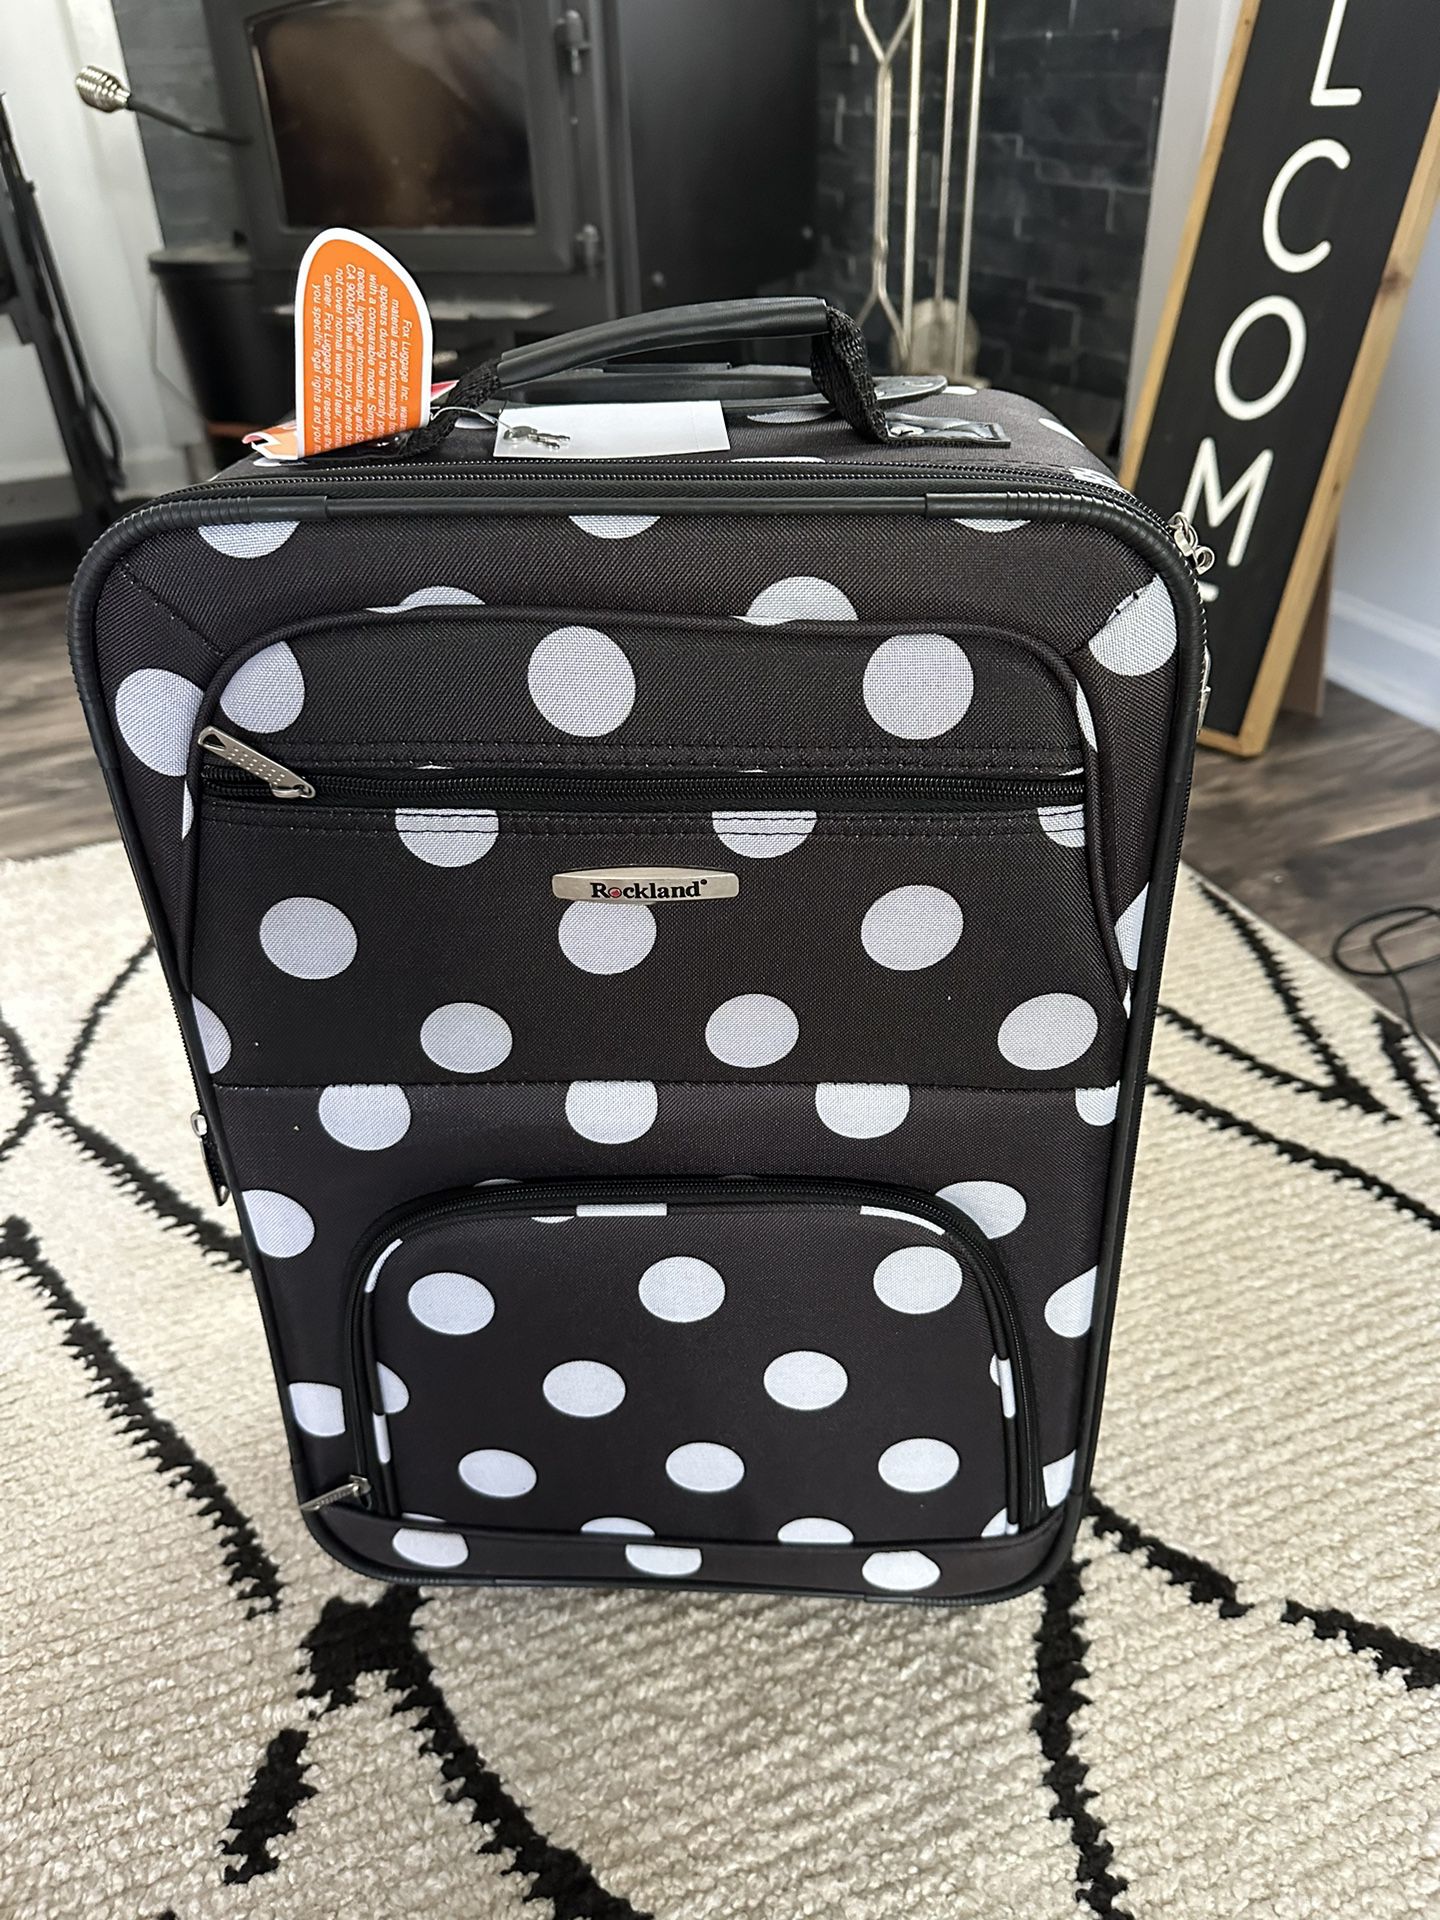 New Rockland Carryon Suitcase 